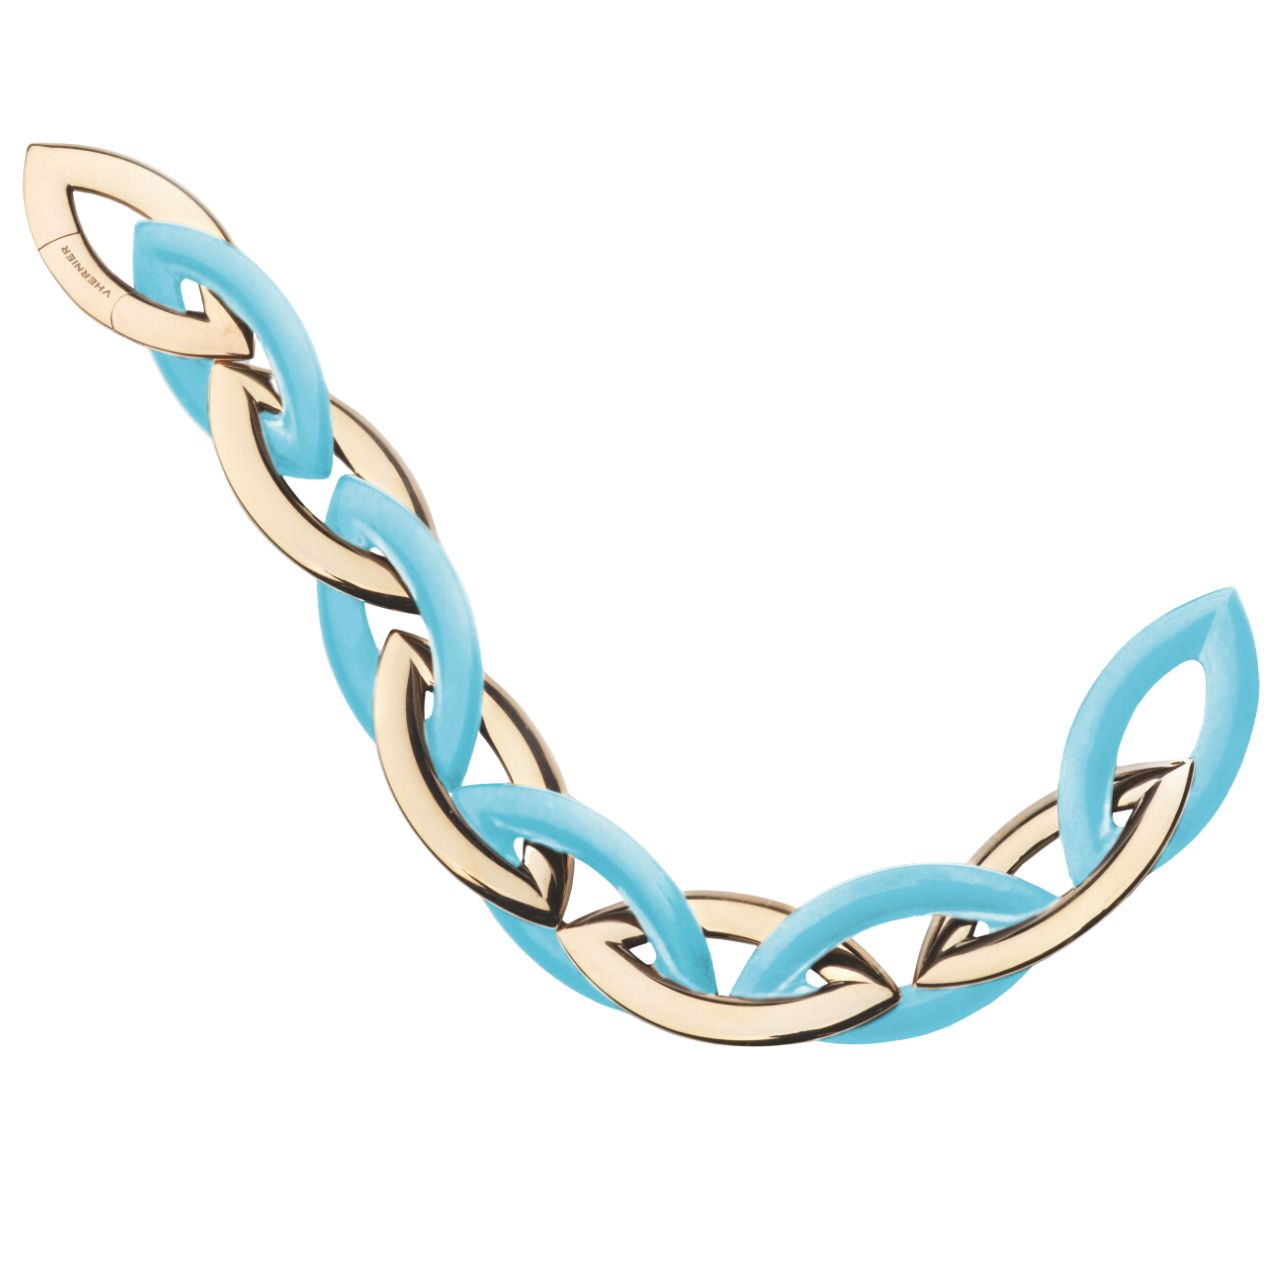 Doppio Senso bracelet in 18k pink gold and turquoise